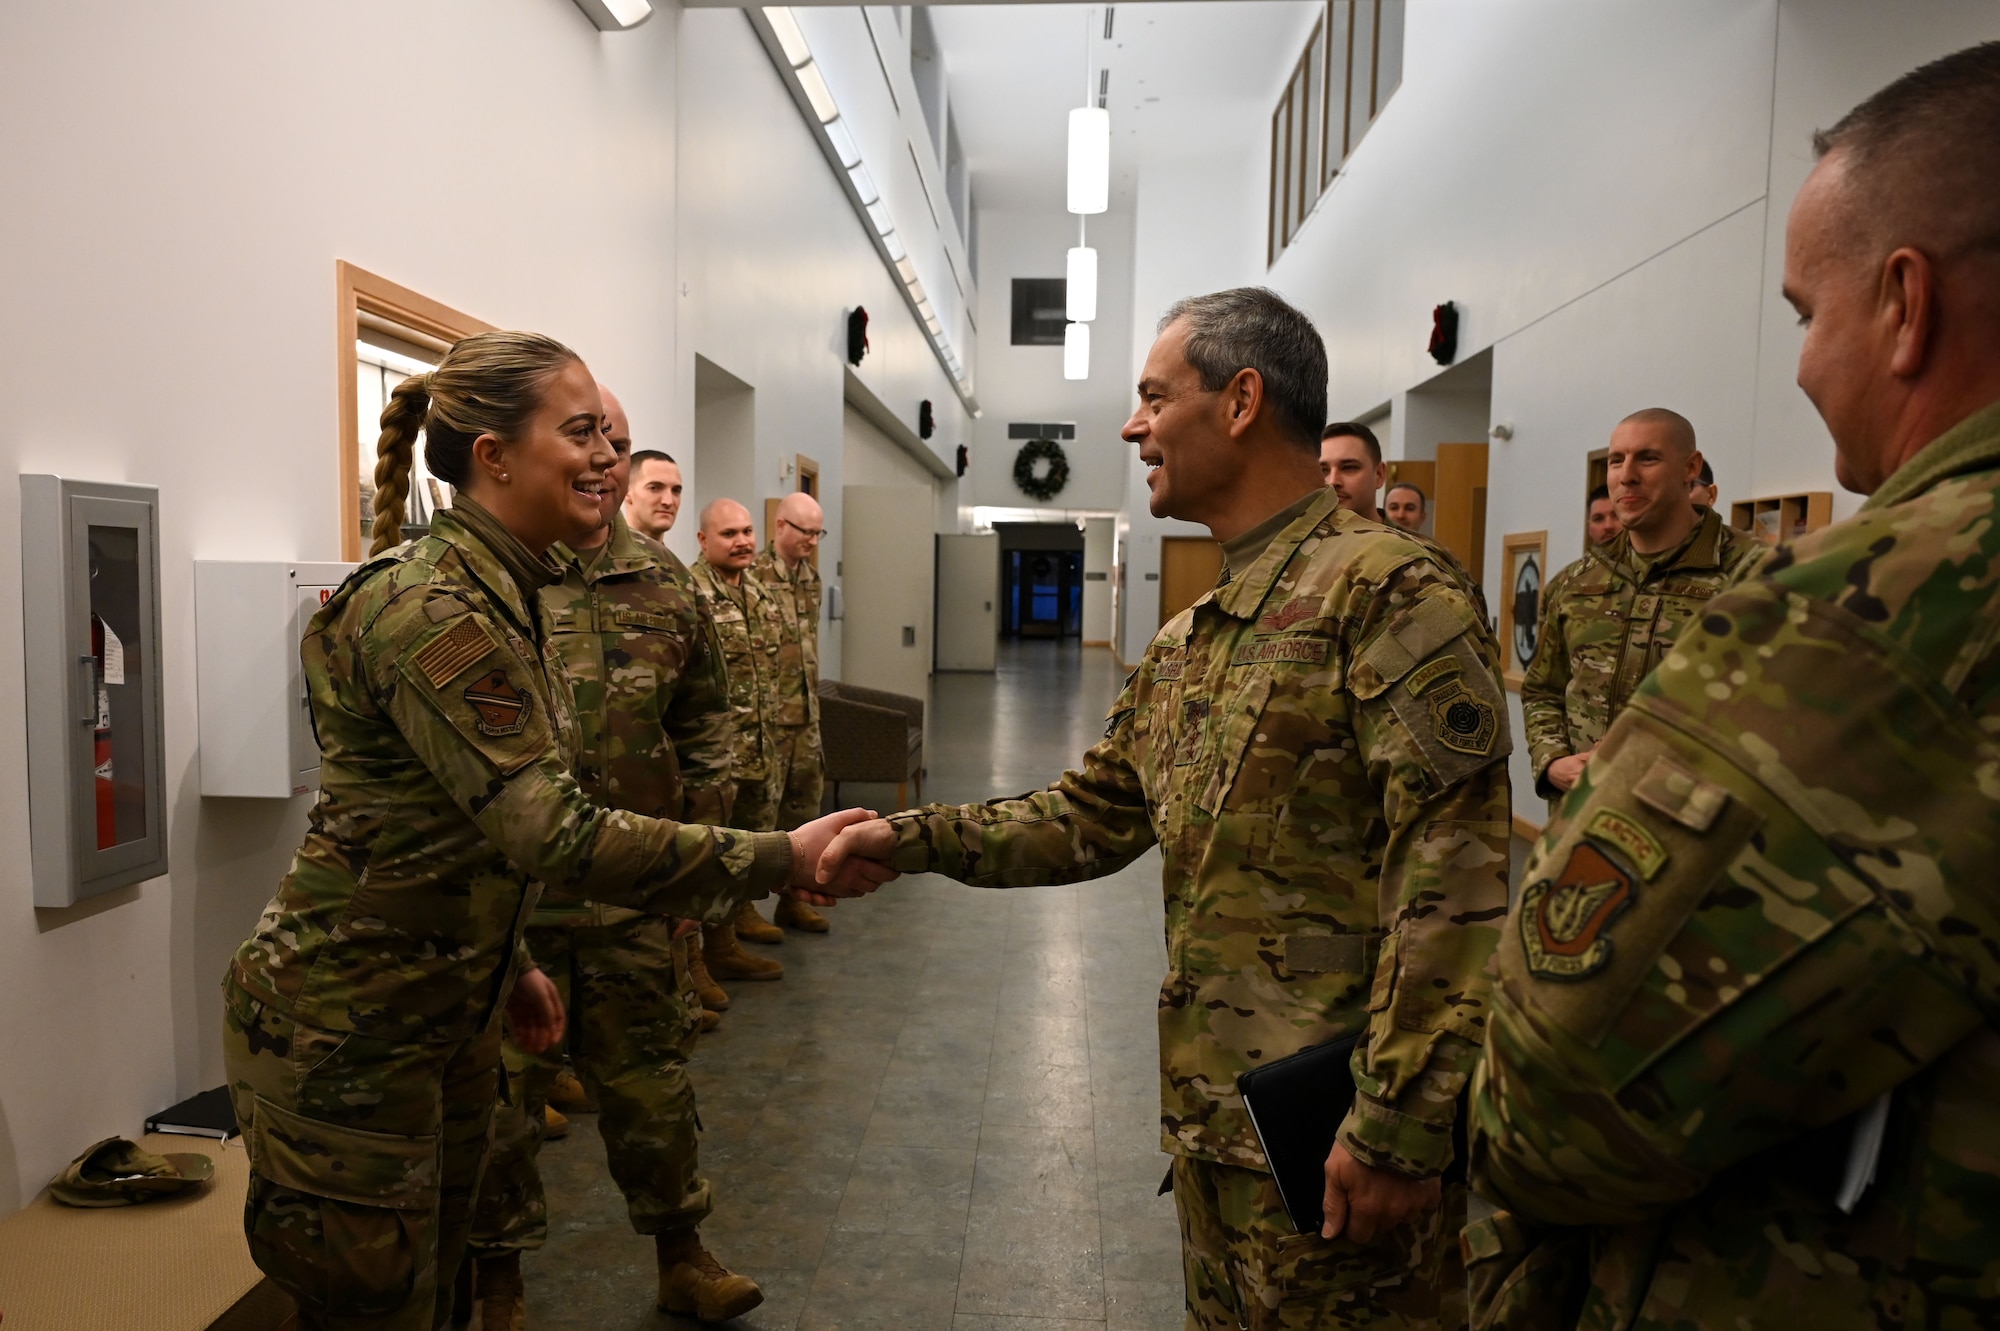 U.S. Air Force Gen. Ken Wilsbach, the Pacific Air Forces commander (right), coins Staff Sgt. Katherine Savvidis, the 354th Medical Group noncommissioned officer in charge of commander support staff, during a base visit at Eielson Air Force Base, Alaska, Jan. 4, 2023.